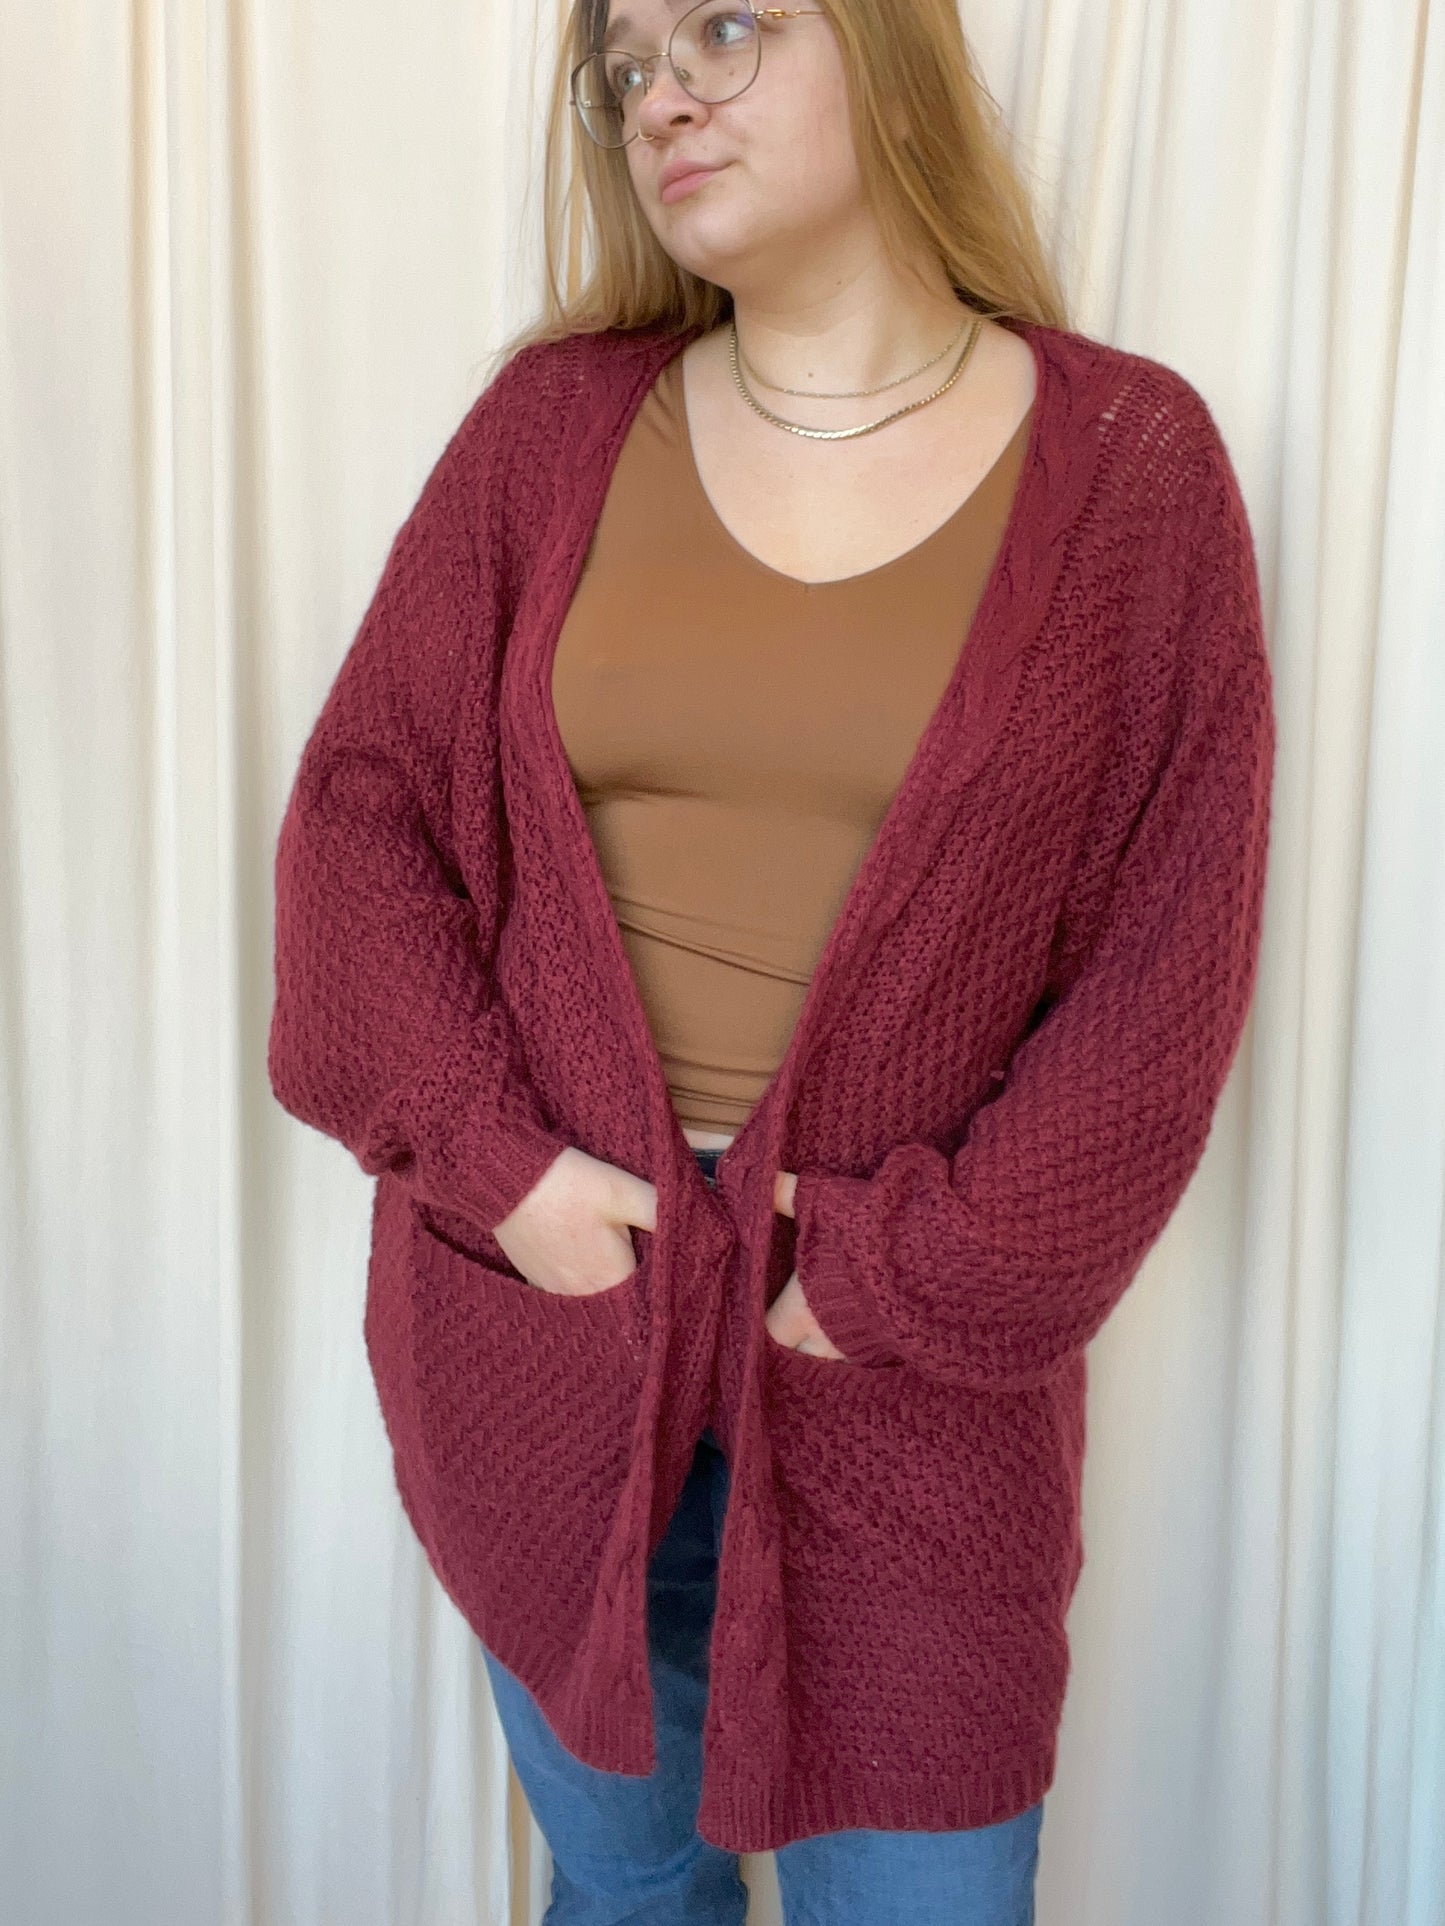 Red Cable Knit Cardigan - 1X-Large